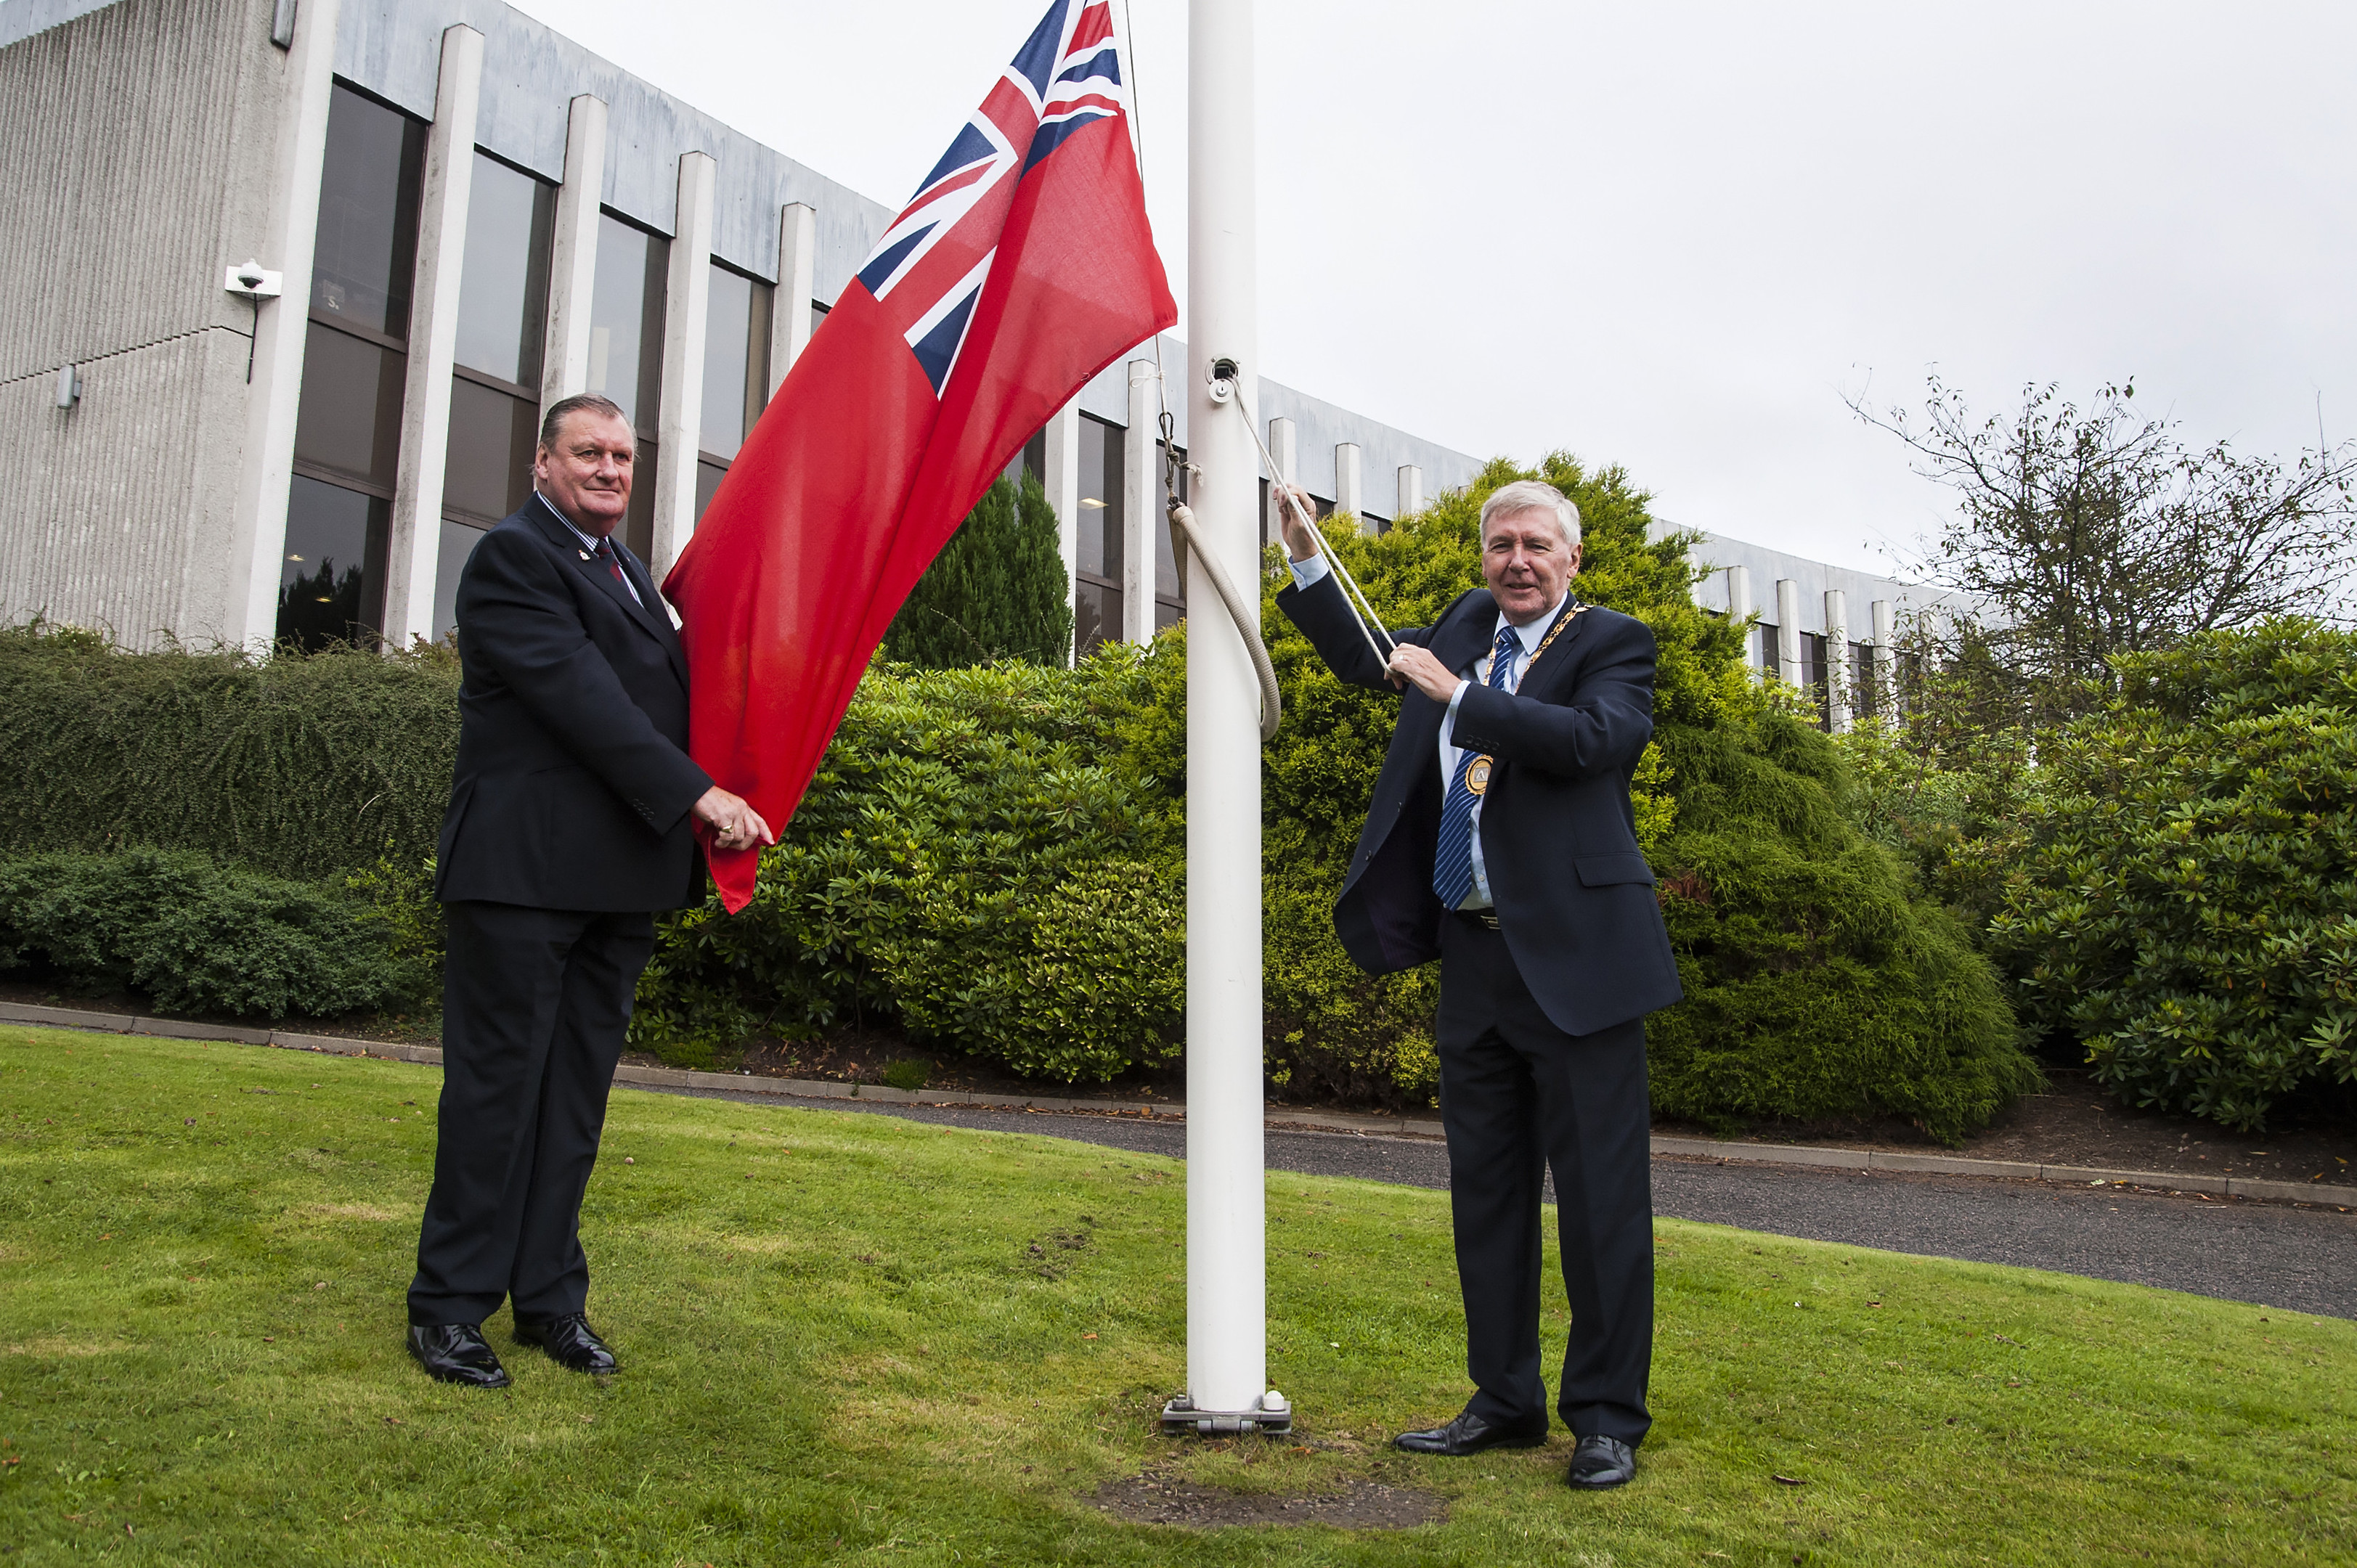 Councillors Allan Hendry and Hamish Vernal raise the red ensign of the Merchant Navy